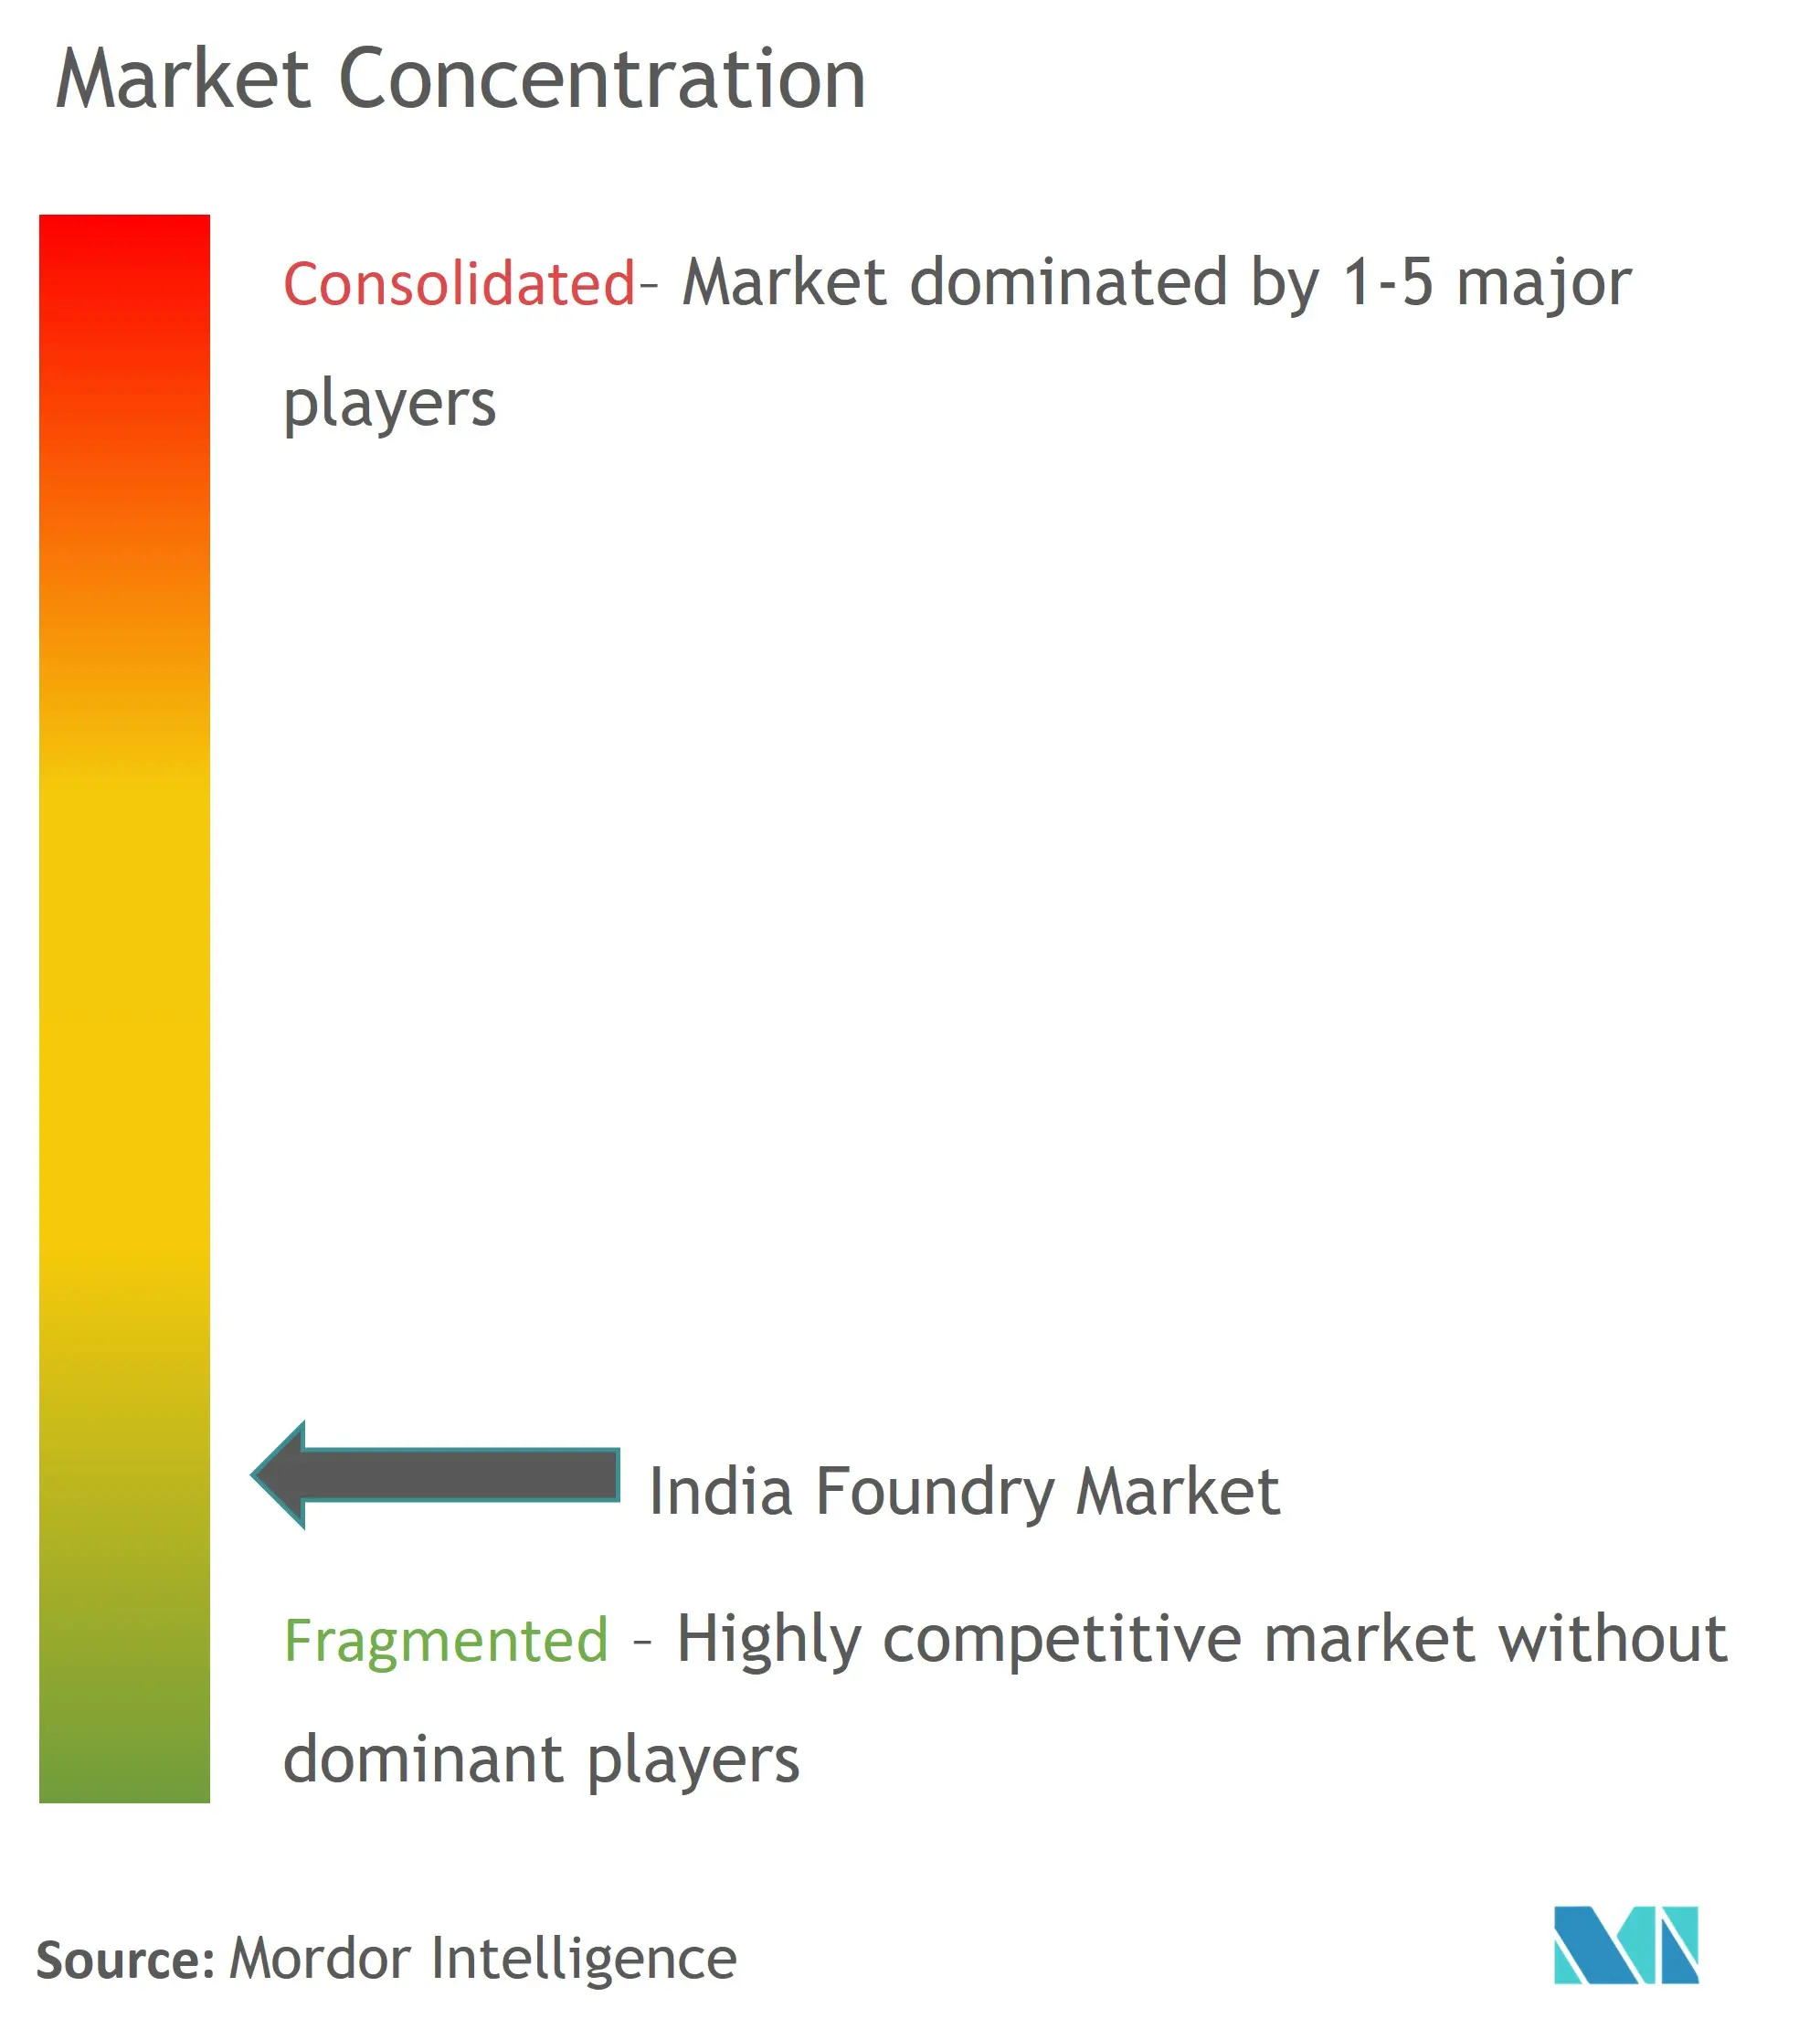 India Foundry Market Concentration